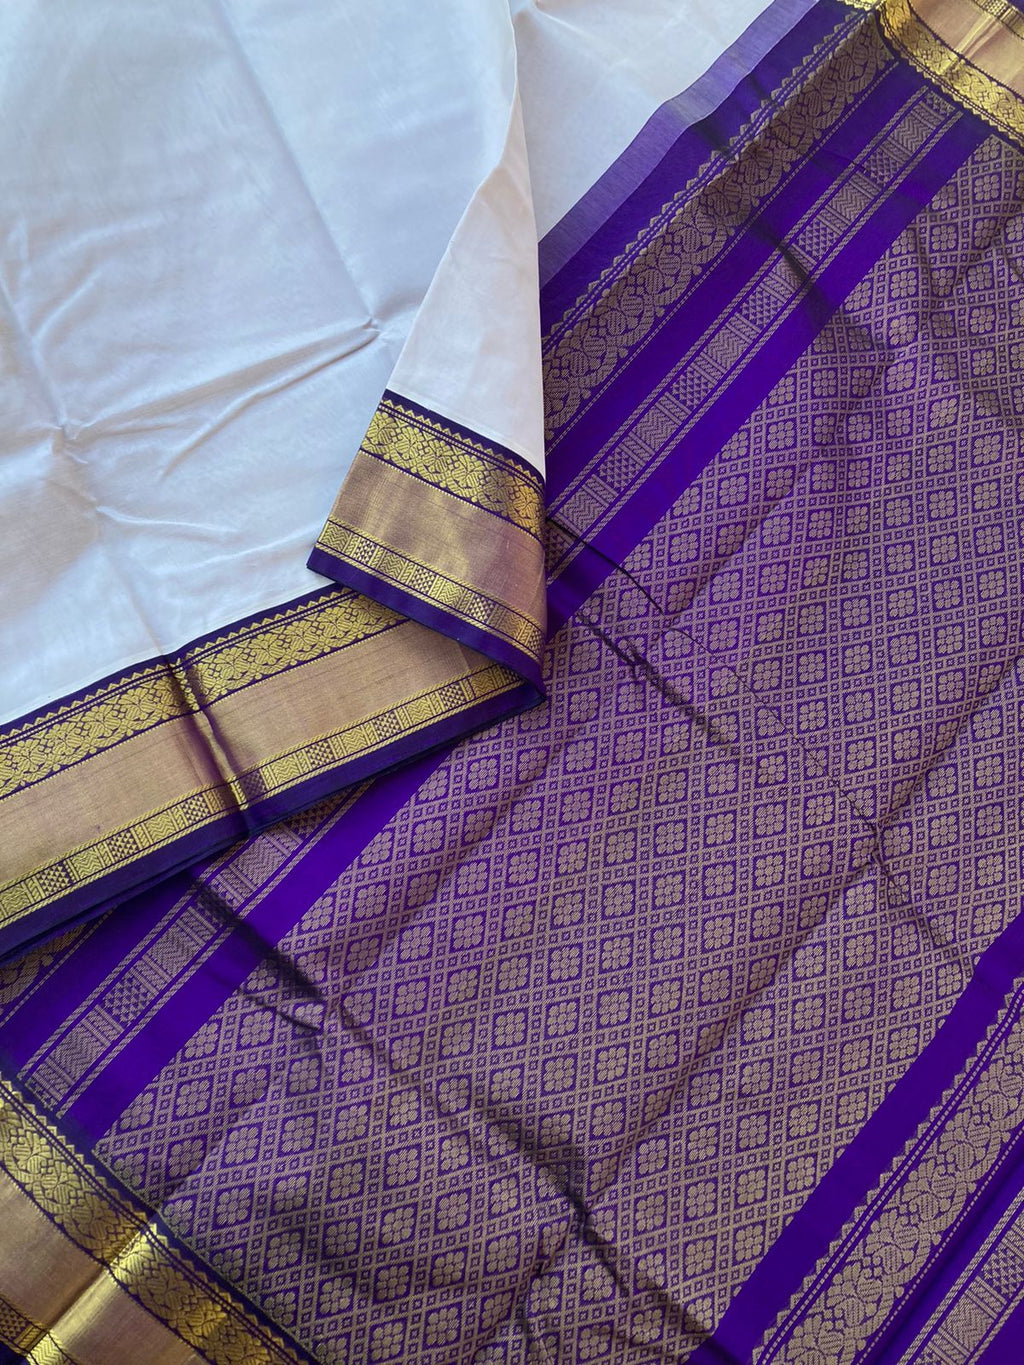 Korvai Silk Cottons - calcium tone with a touch of grey and violet